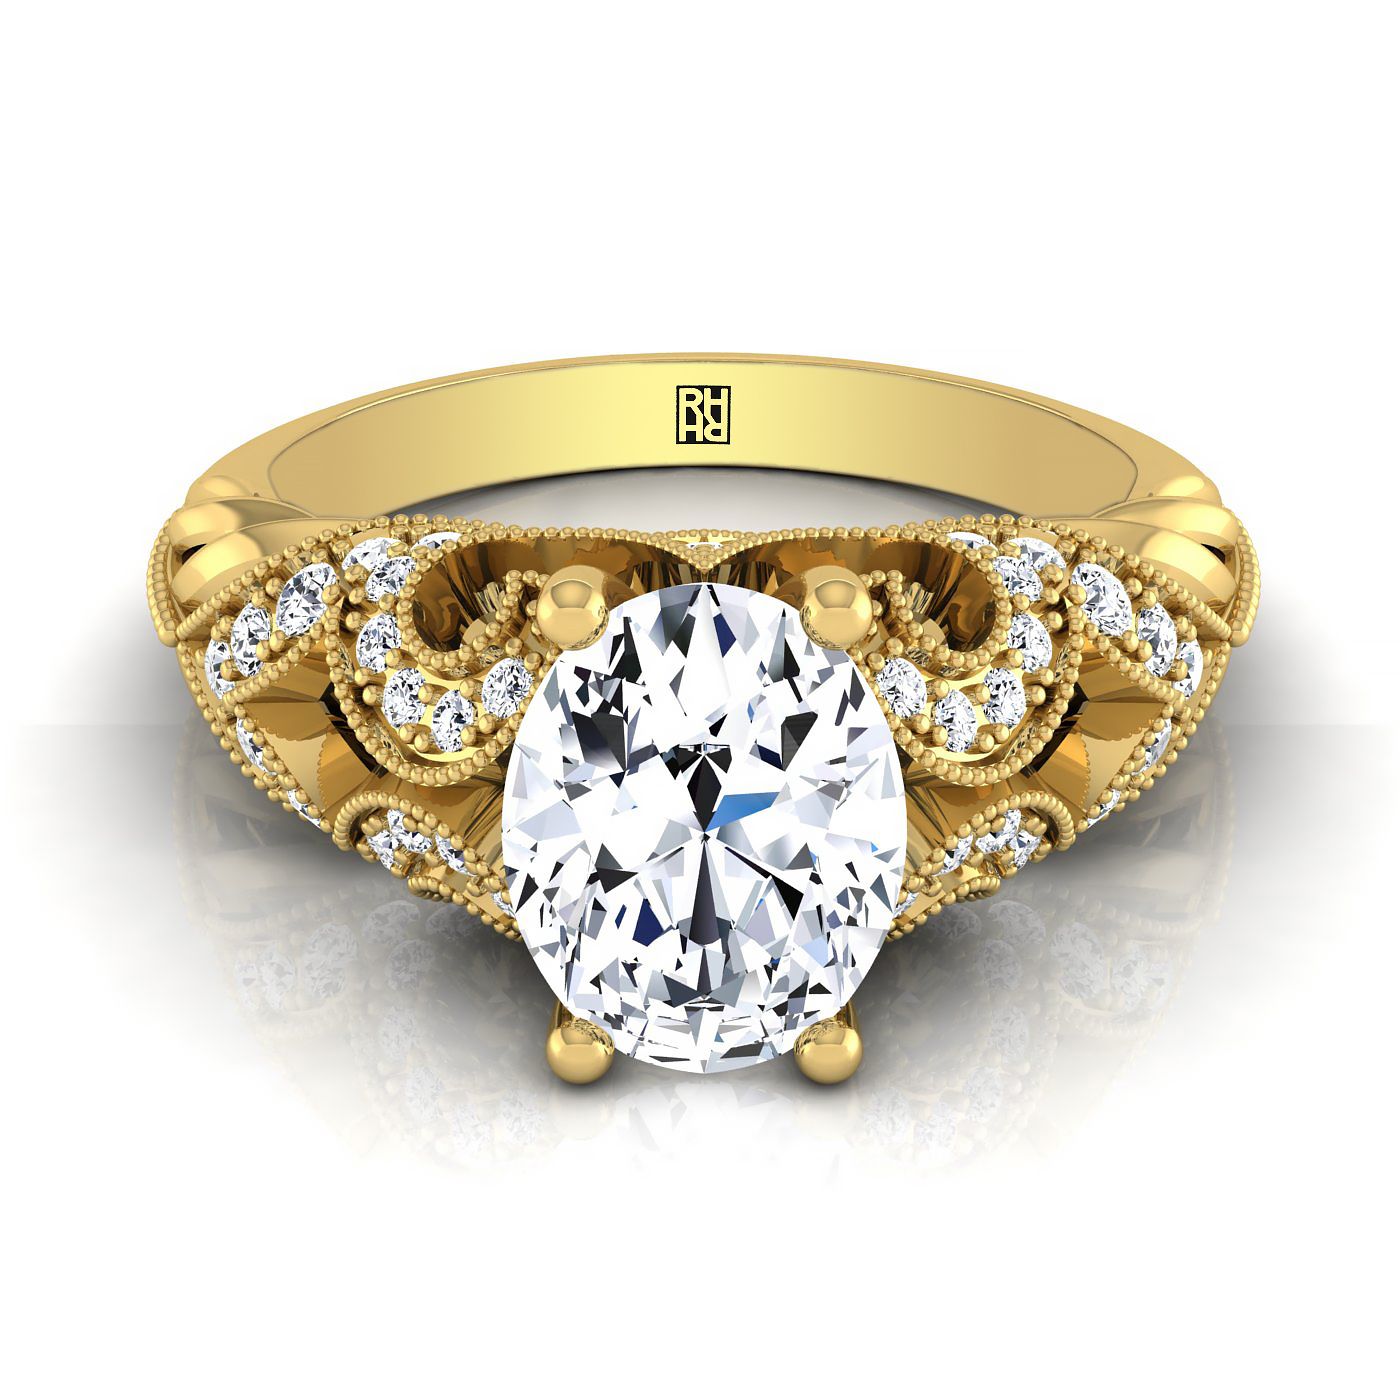 14K Yellow Gold Oval Beautiful Open Scroll and Antique Bead Diamond Engagement Ring -1/3ctw